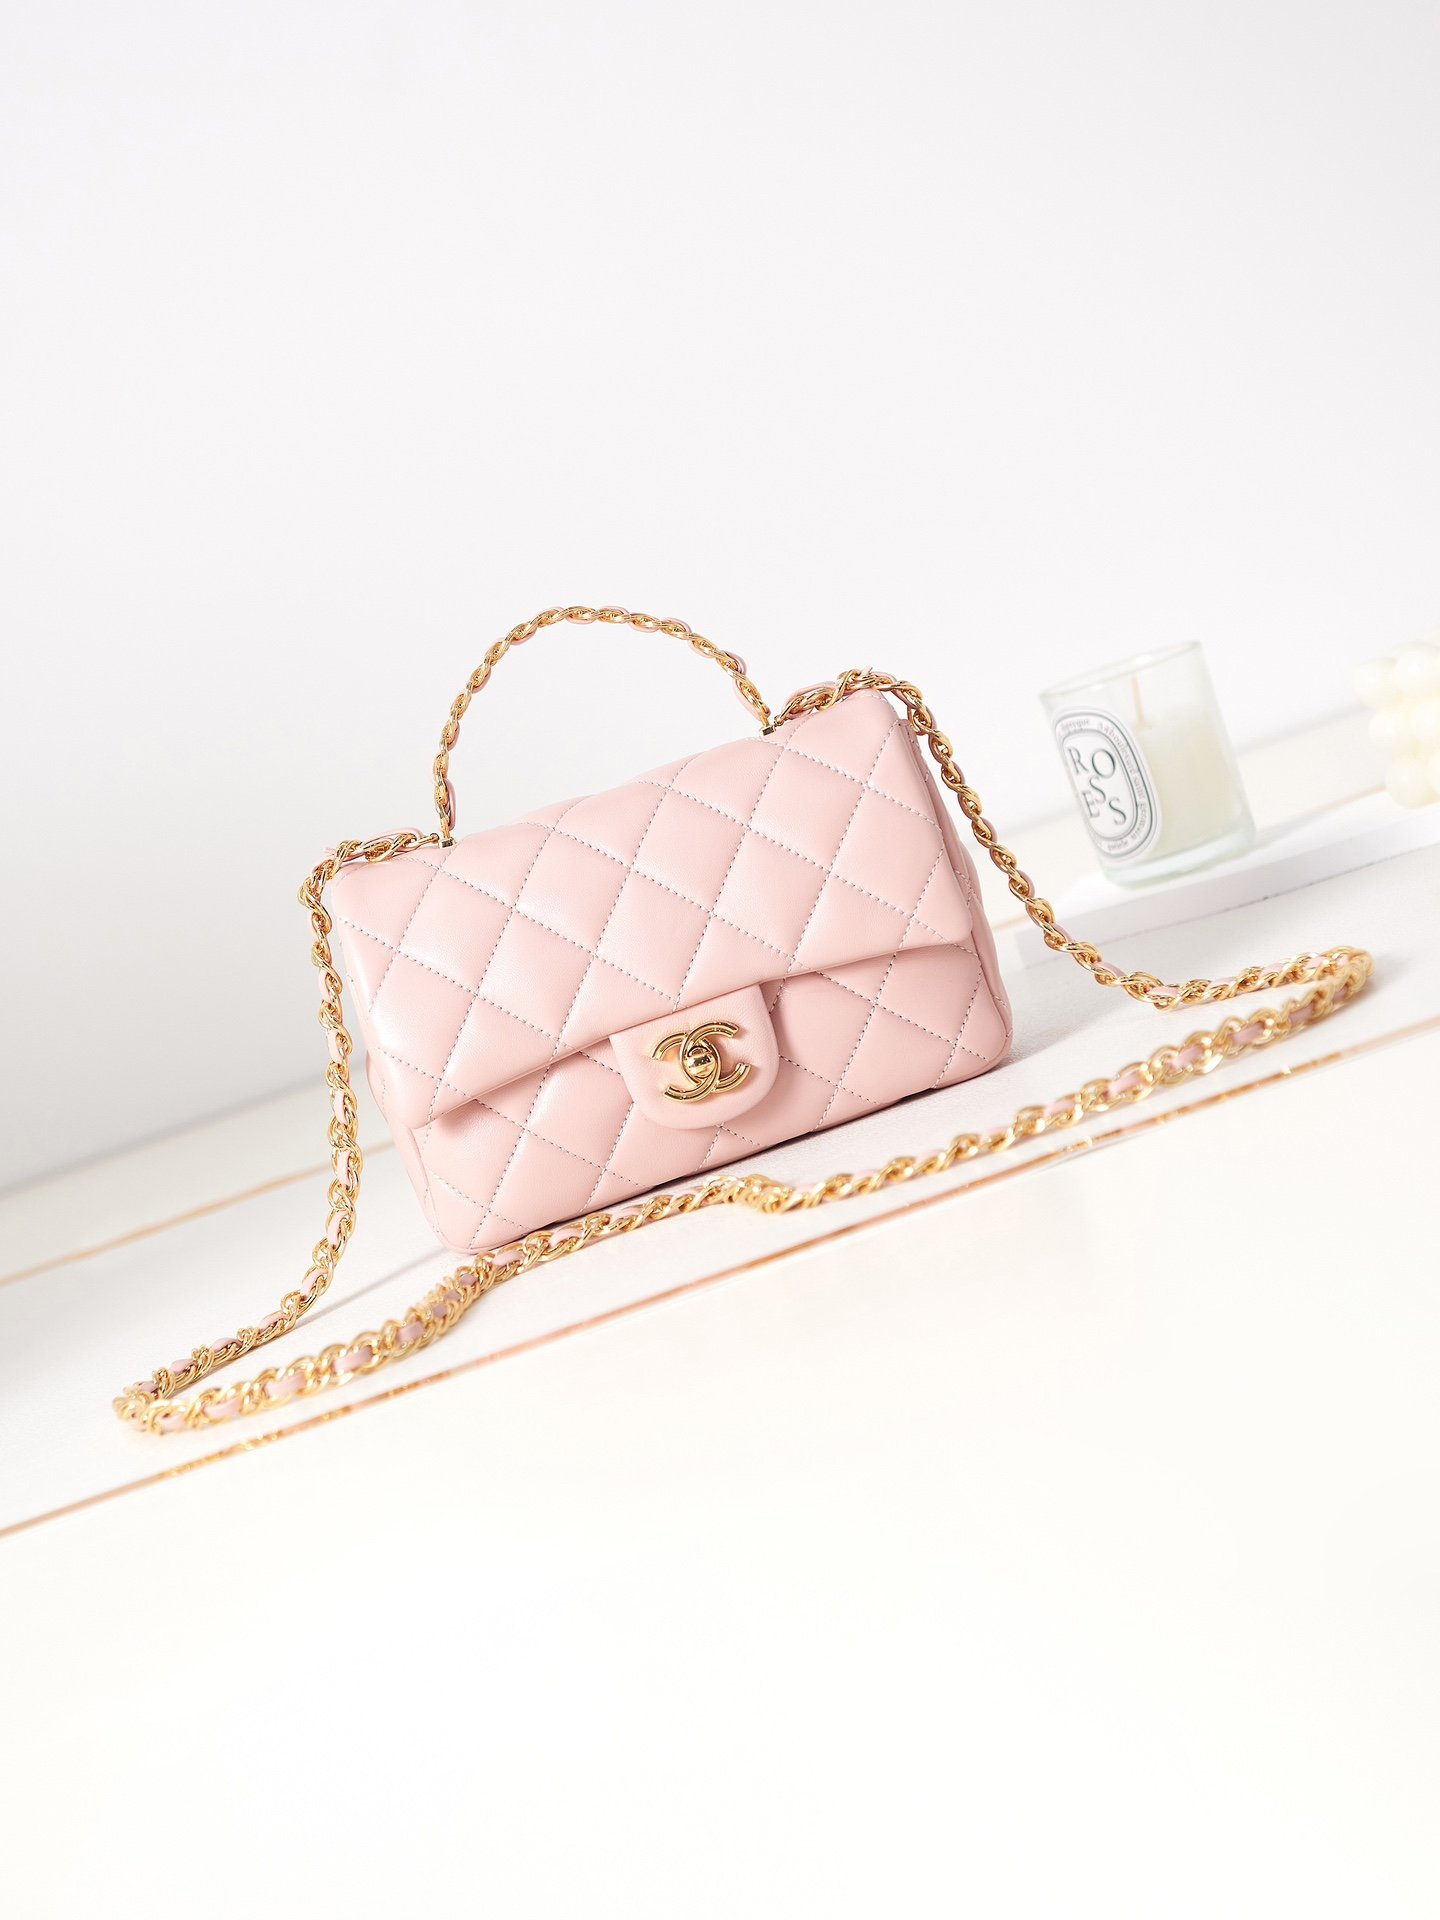 A bag Small Flap Bag with Top Handle 21 cm